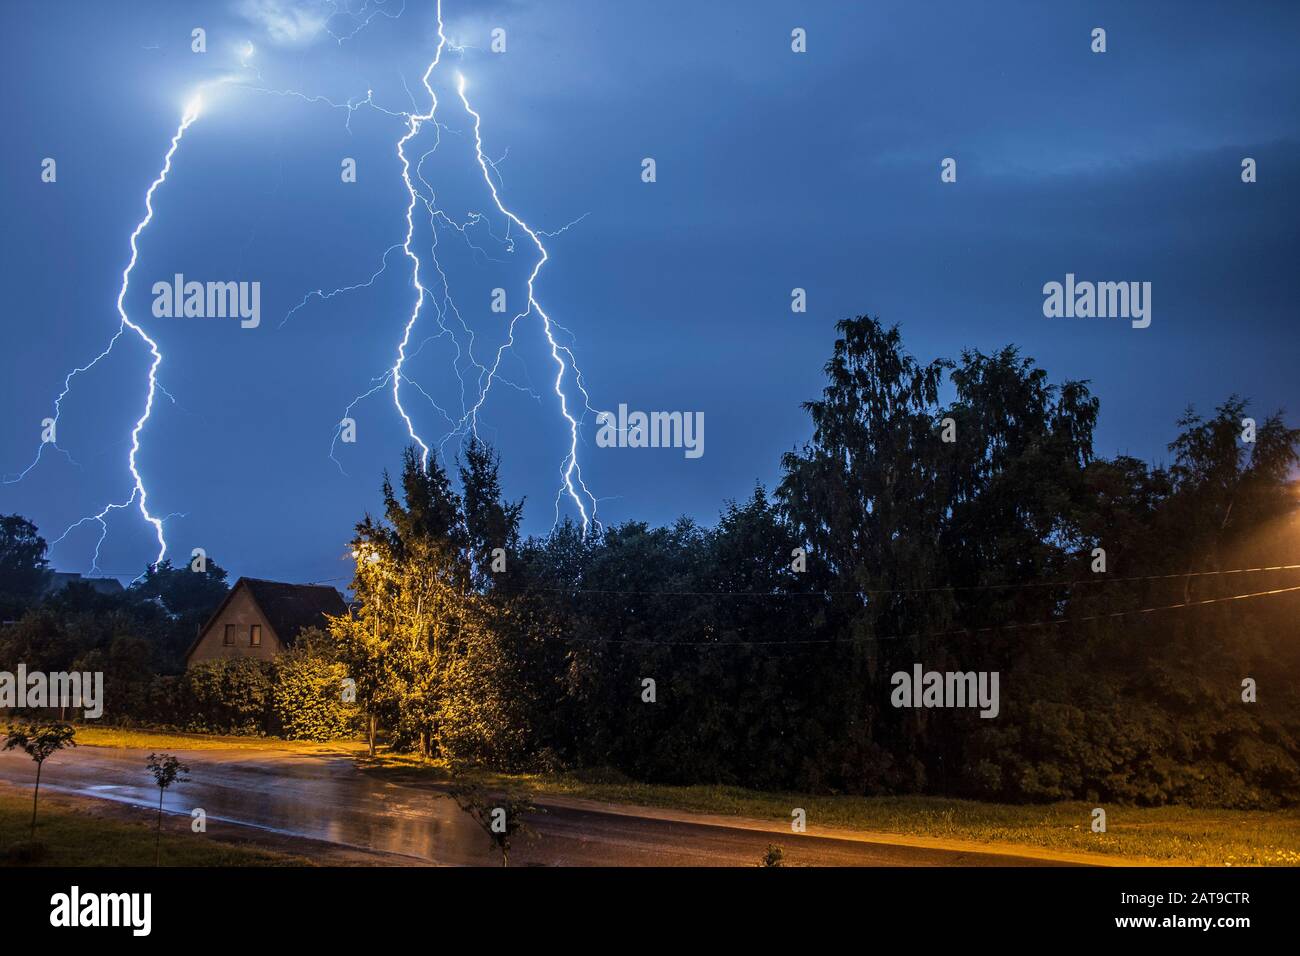 Thunder lightning on a summer night over a small village with trees and houses Stock Photo